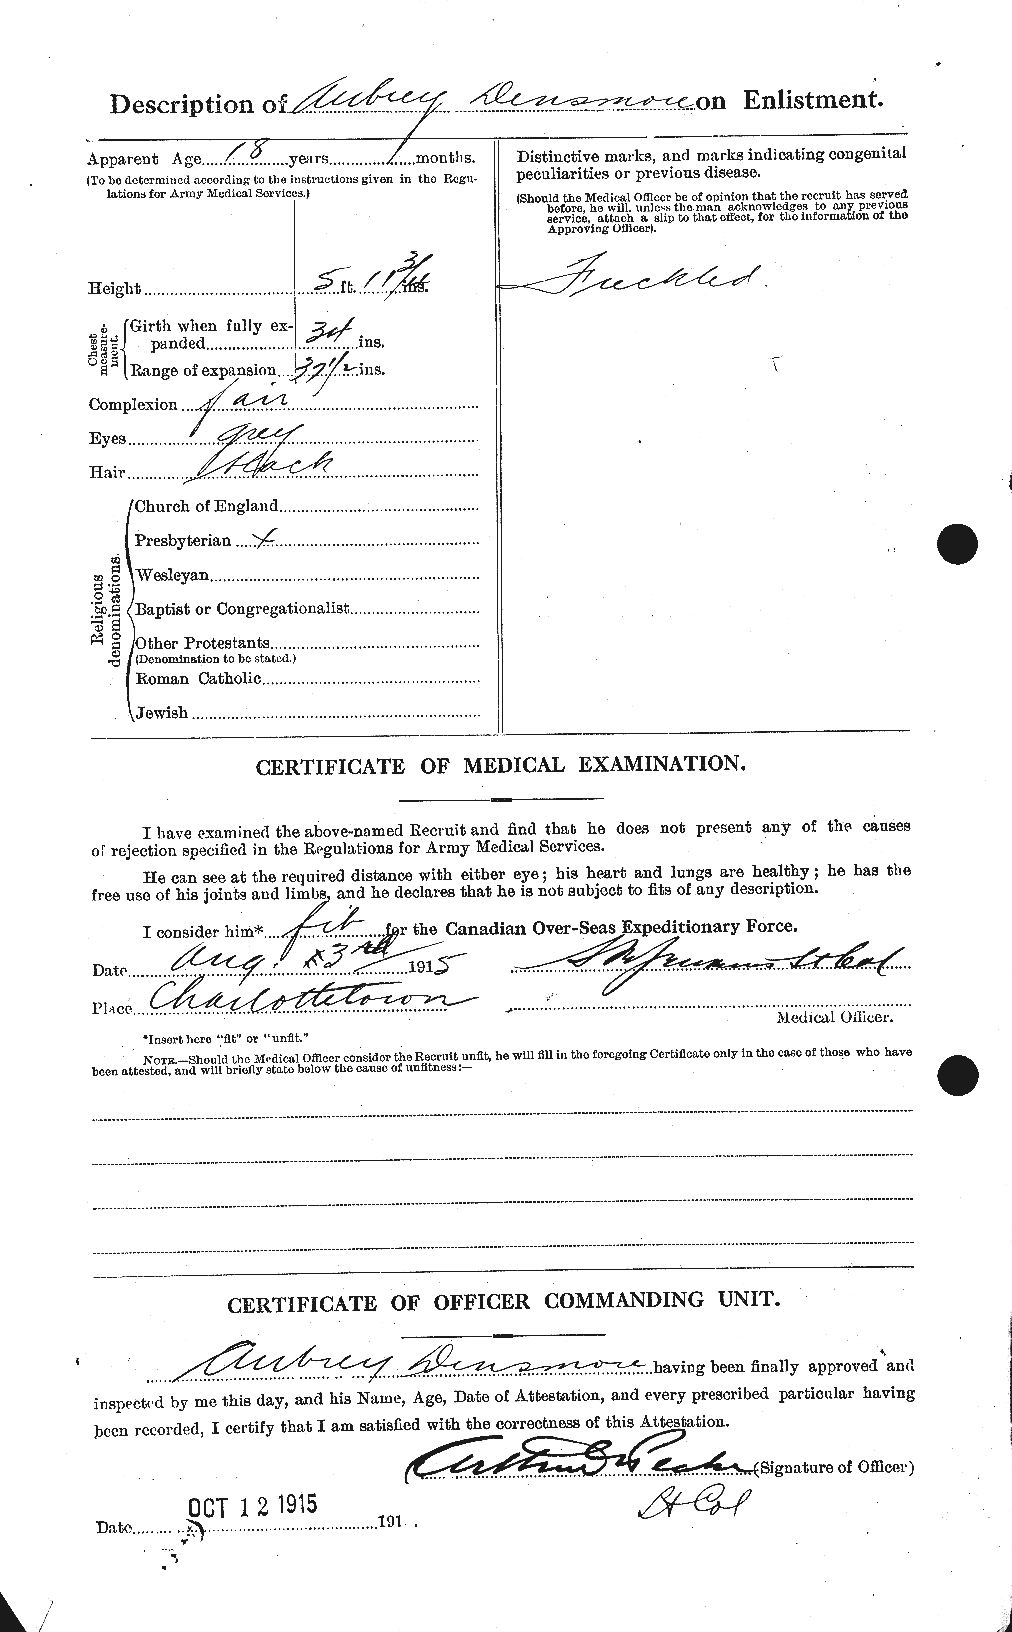 Personnel Records of the First World War - CEF 286420b